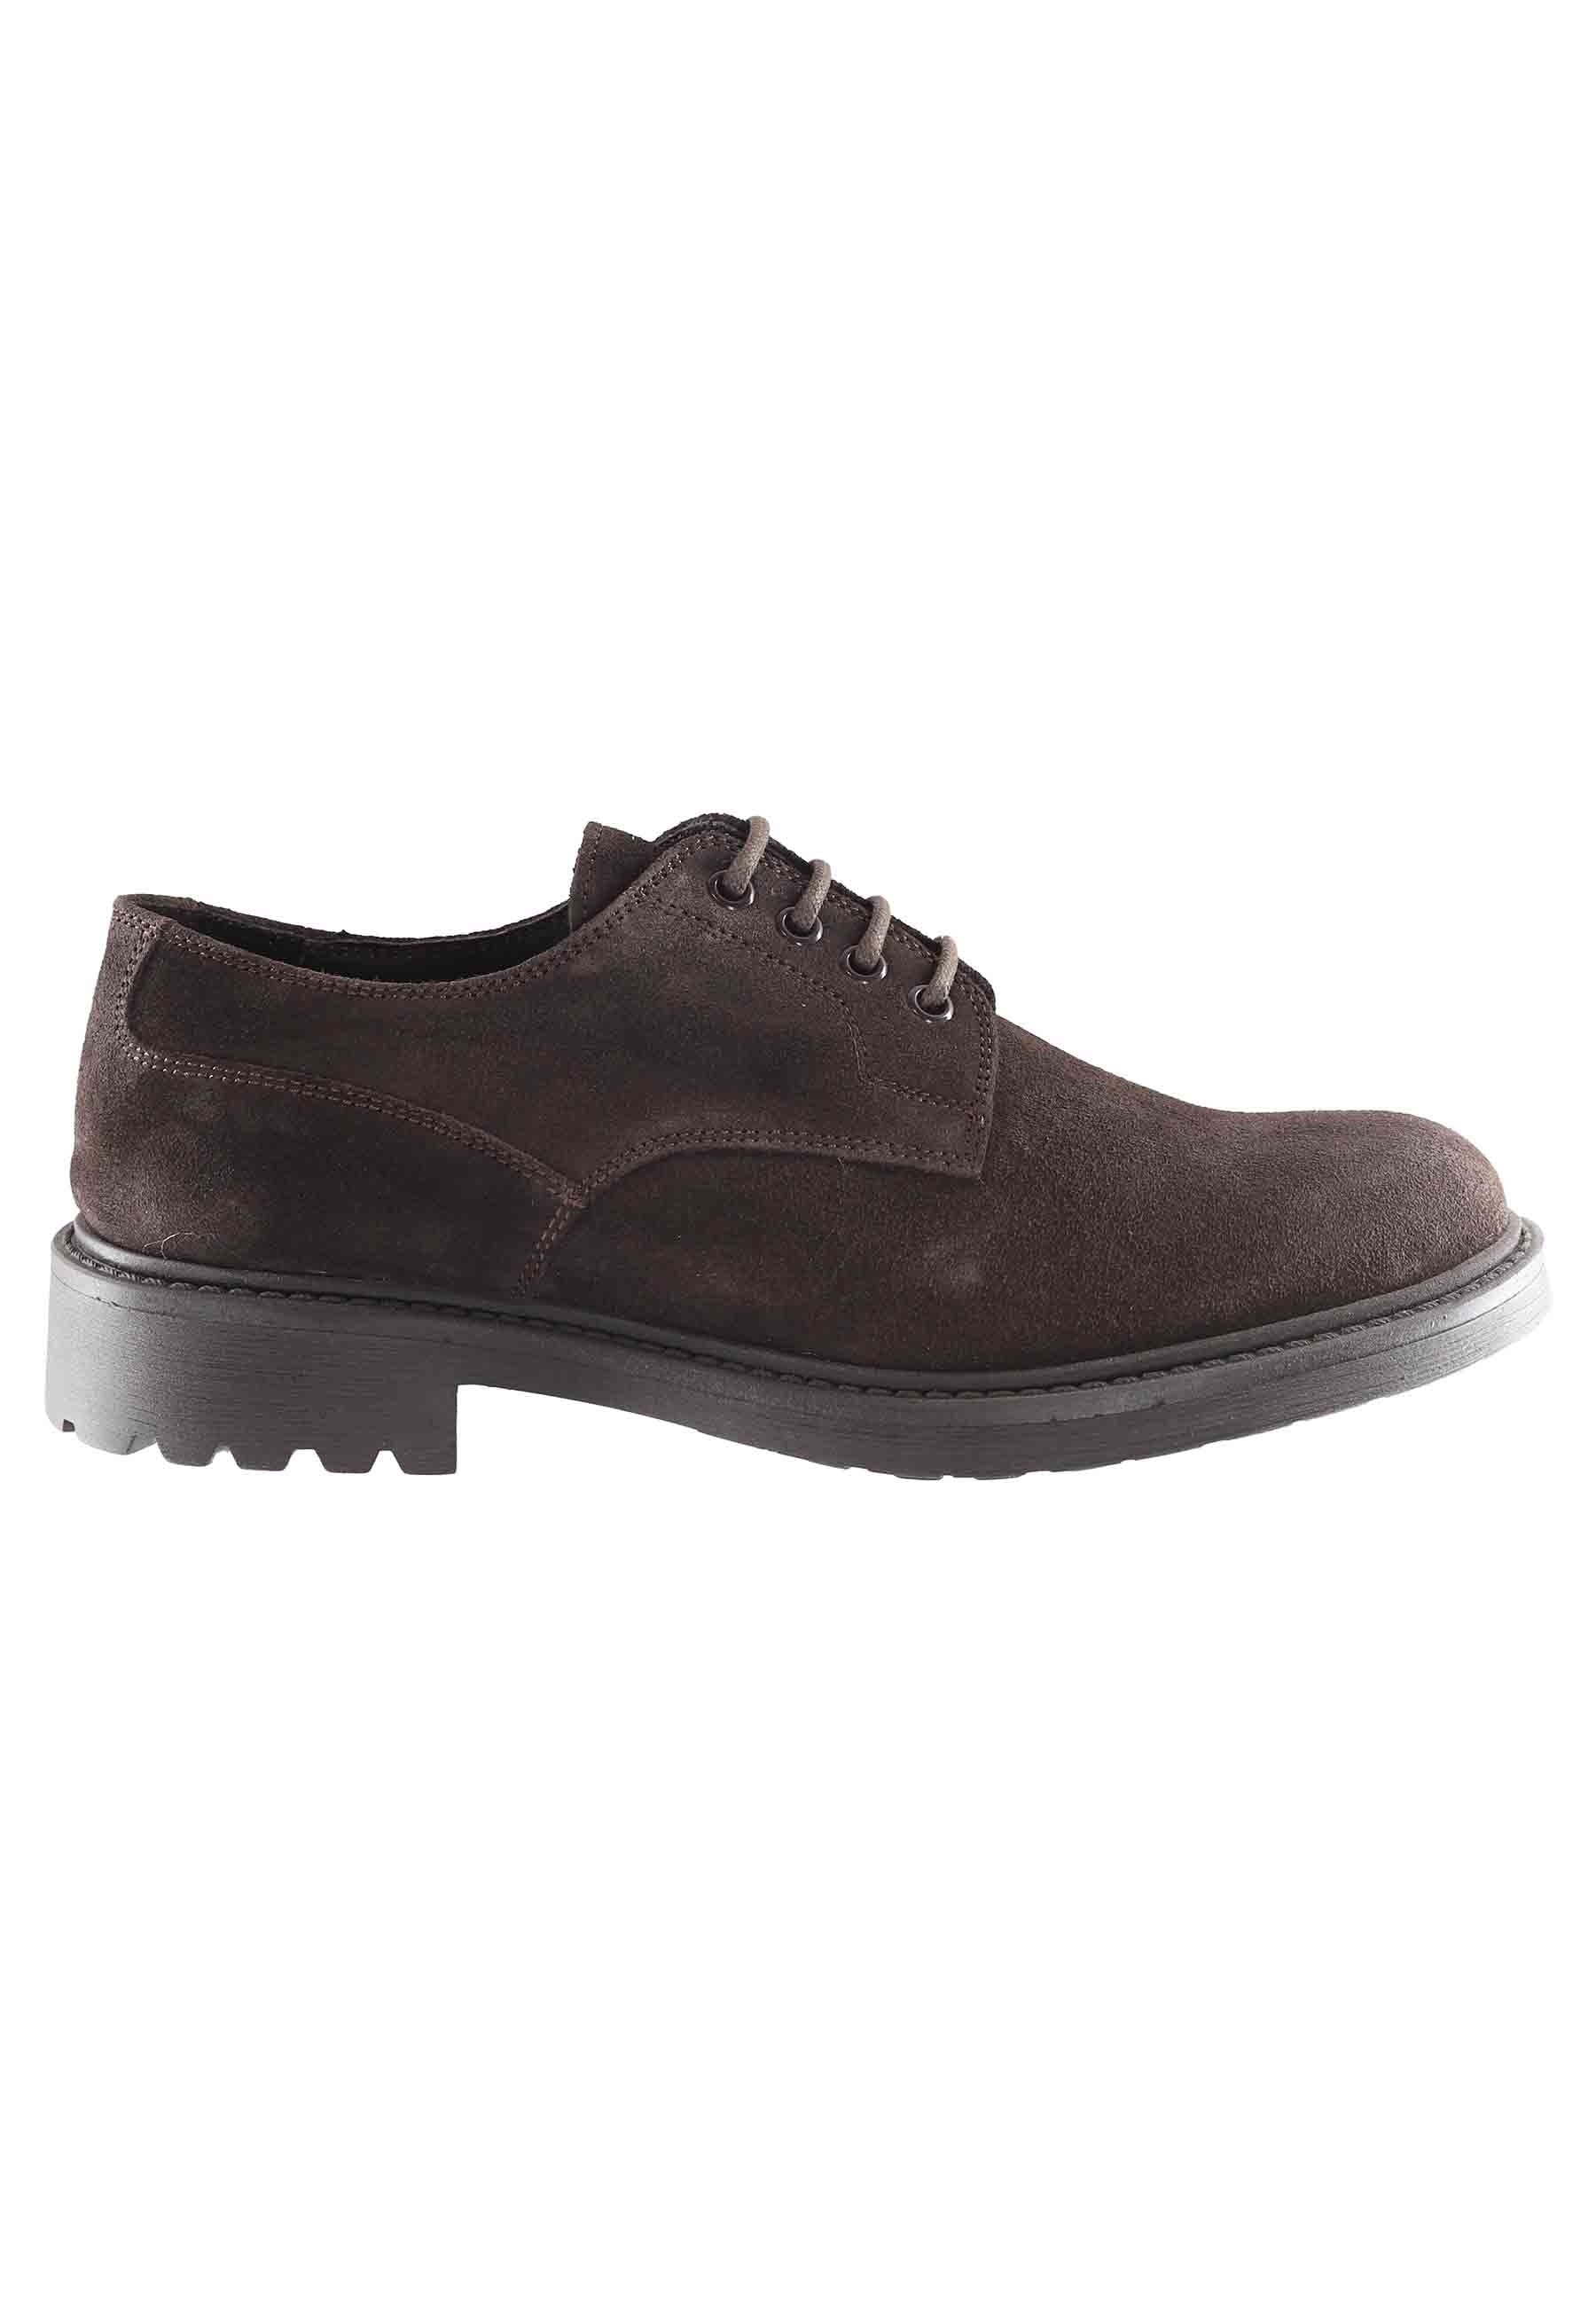 Men's lace-ups in dark brown greased suede with rubber sole